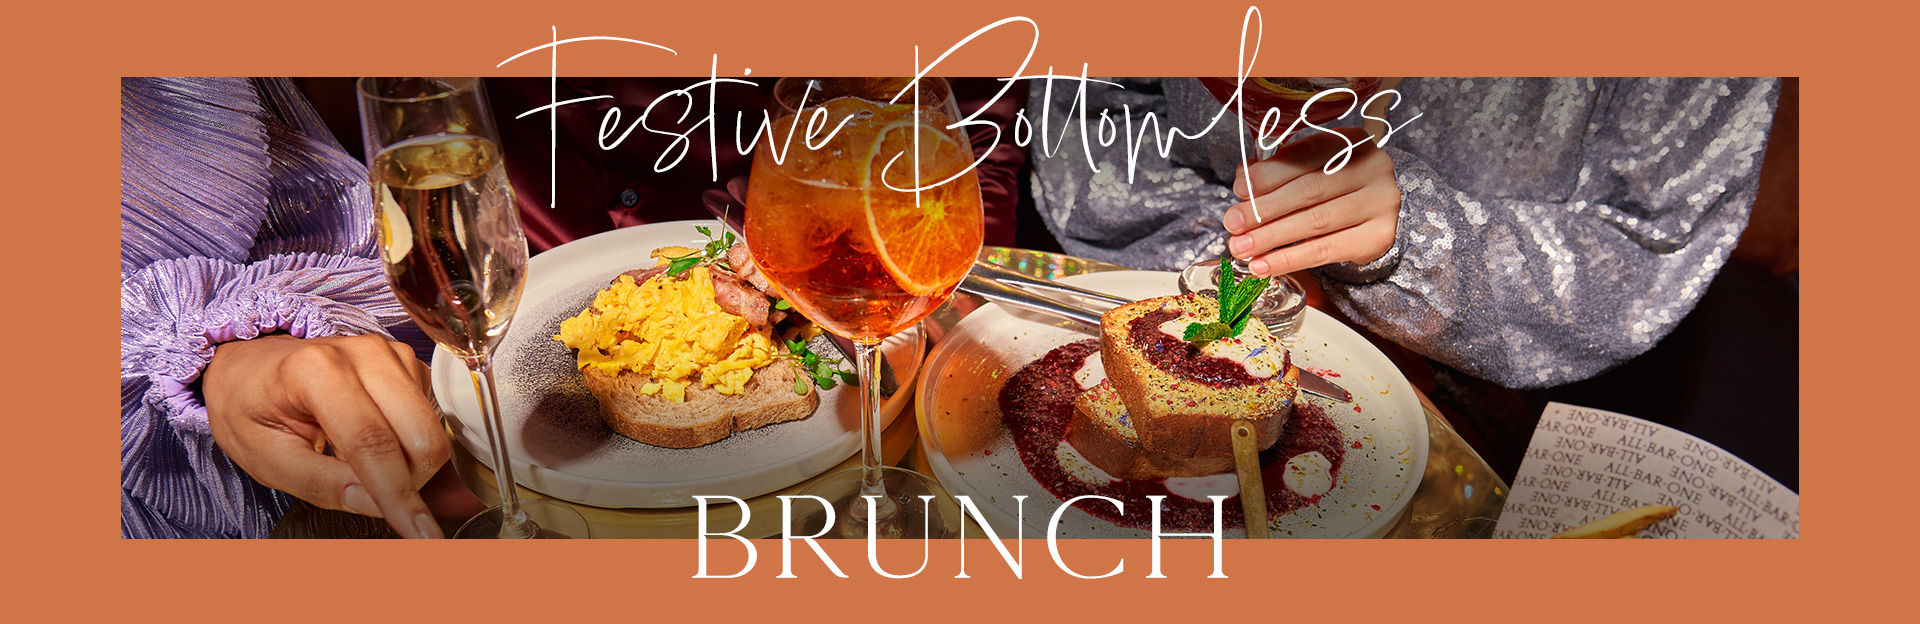 Bottomless Christmas Brunch at All Bar One New Street Station